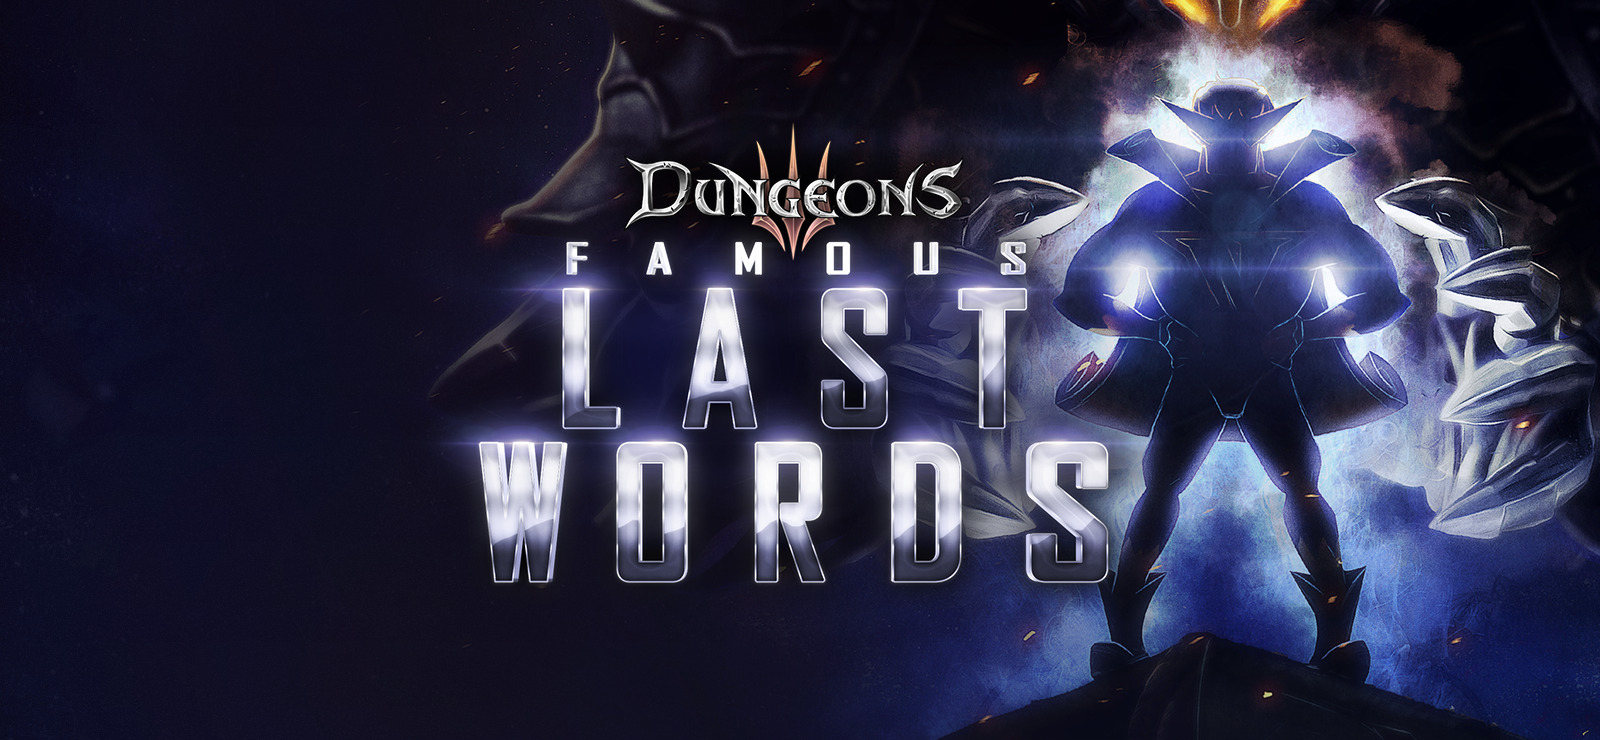 Last famous игра. Dungeons 3 famous last Words DLC. Dungeons 3 - complete collection 2. Злой ласт